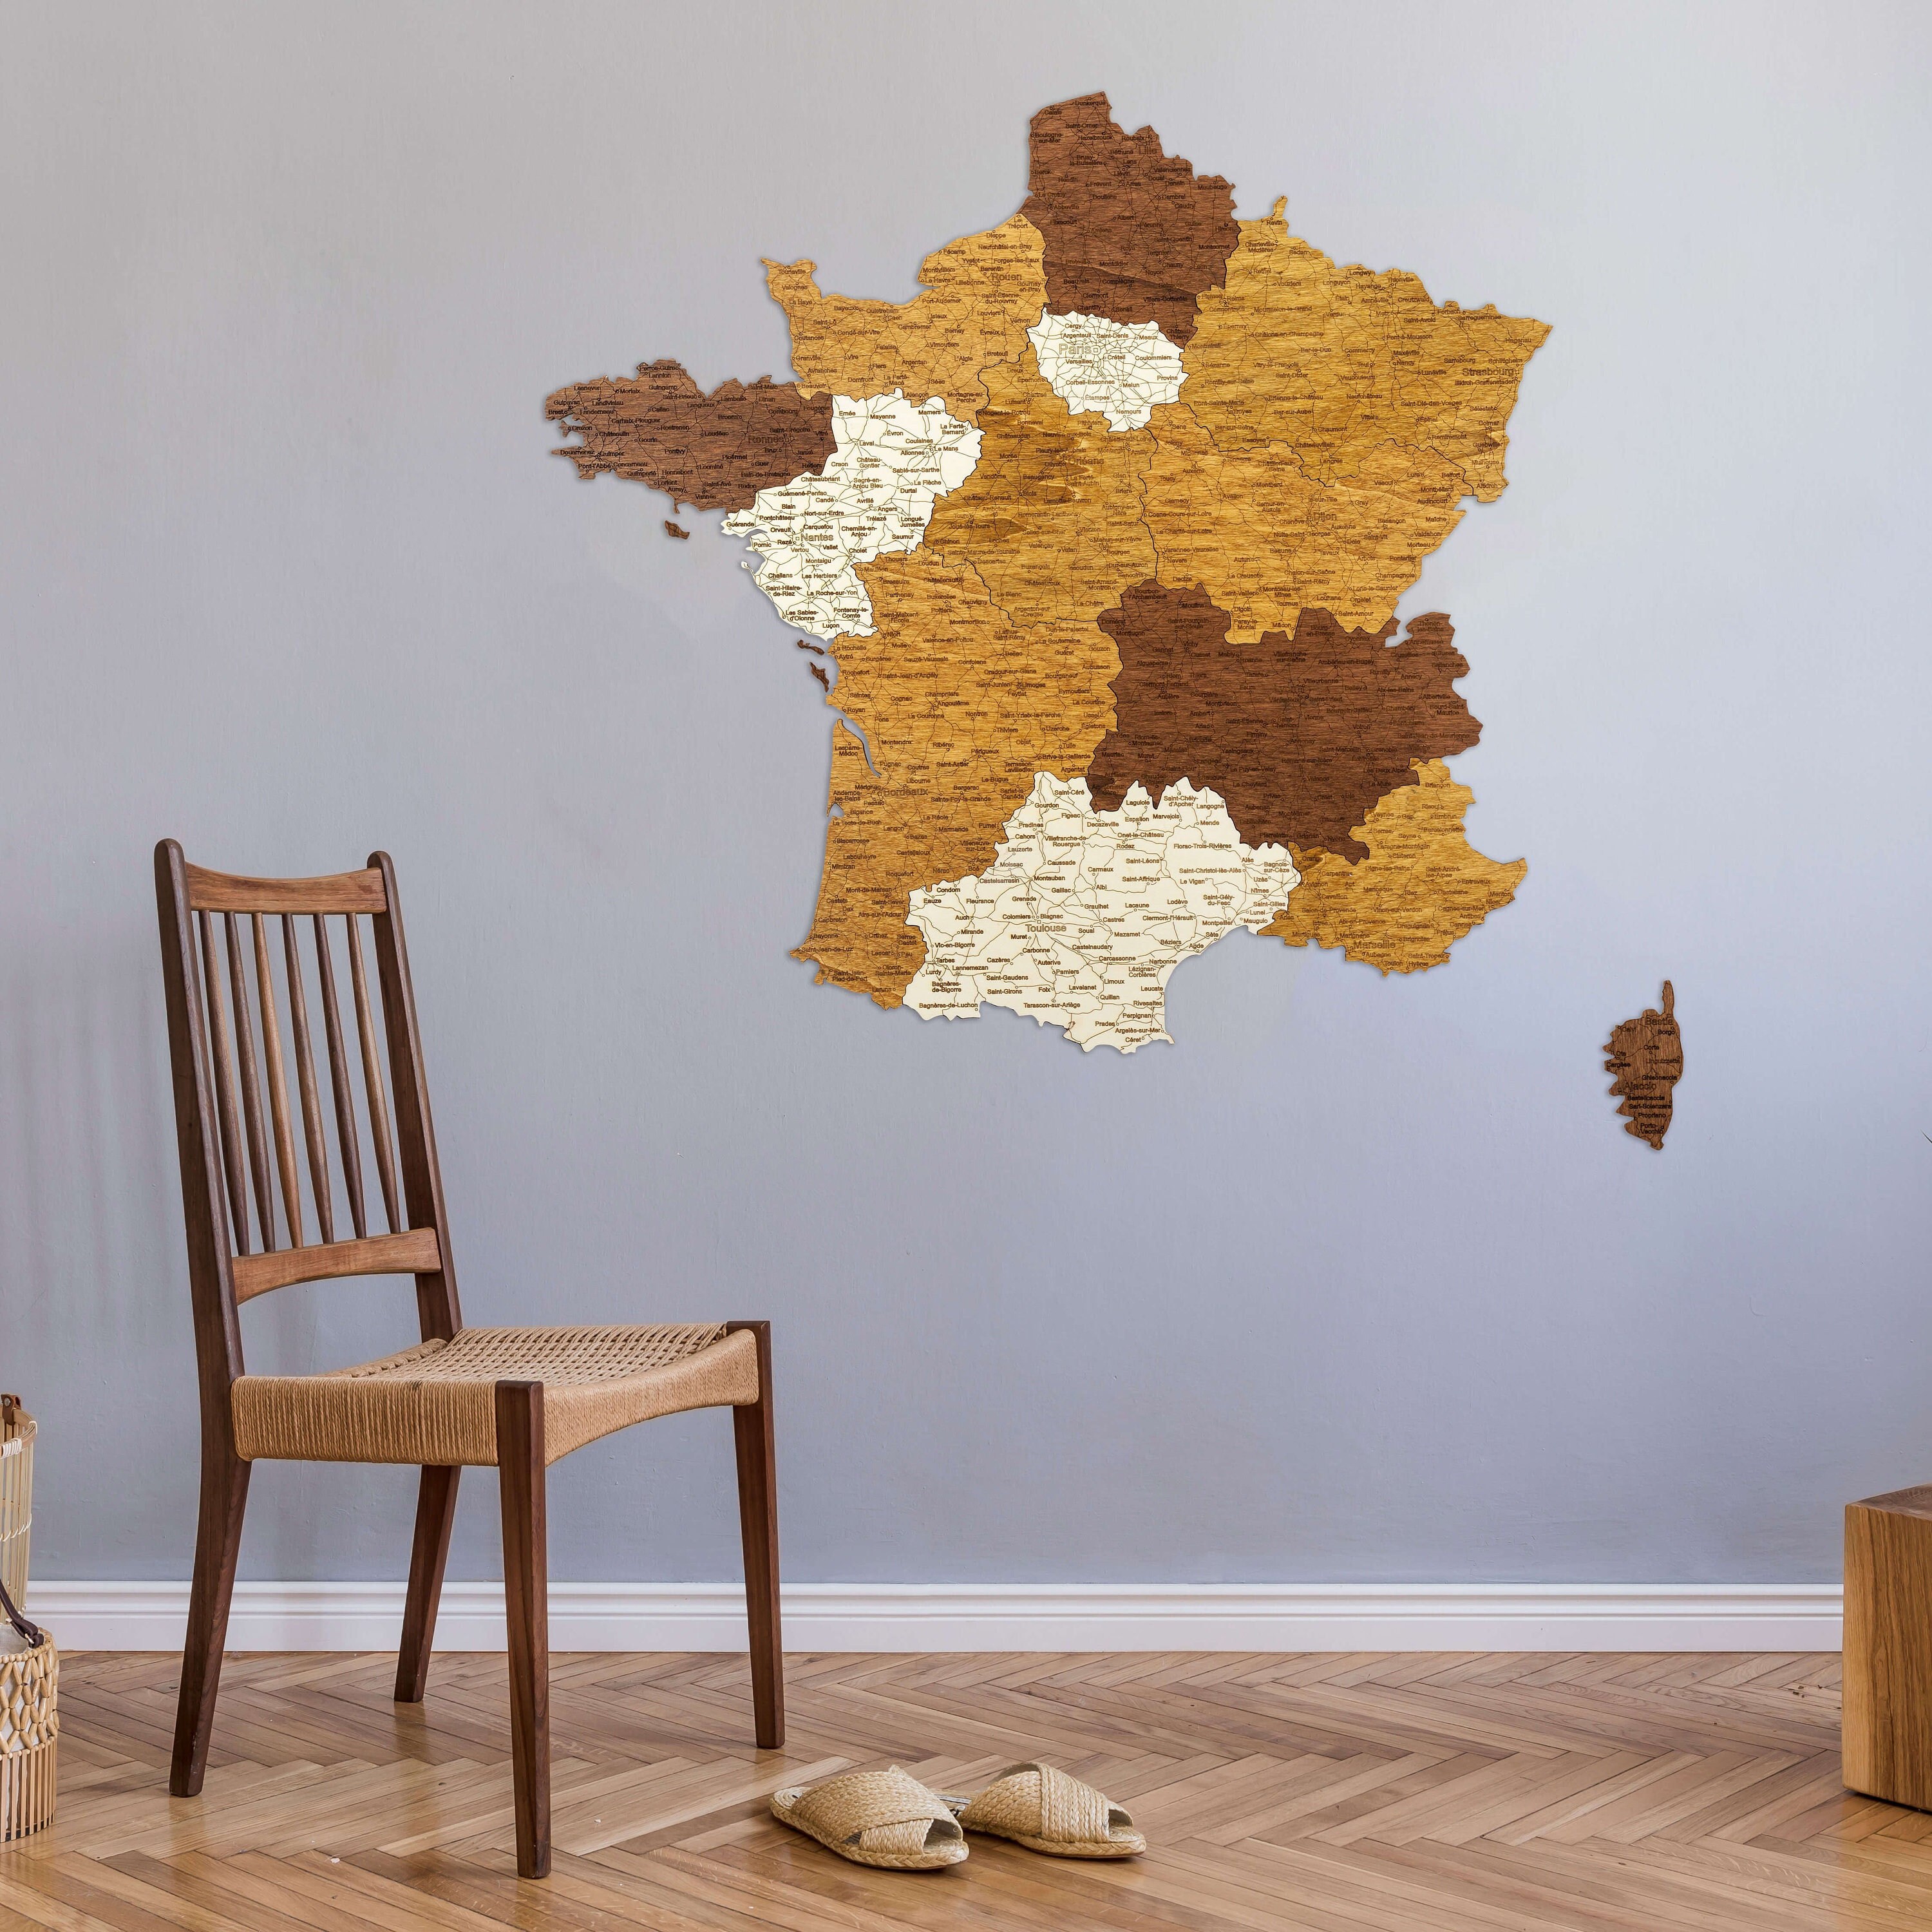 Wooden World map wall decoration - multilayer, multicolor stained wood,  engraved names, borders - unique 3D design - for living room, kitchen,  office